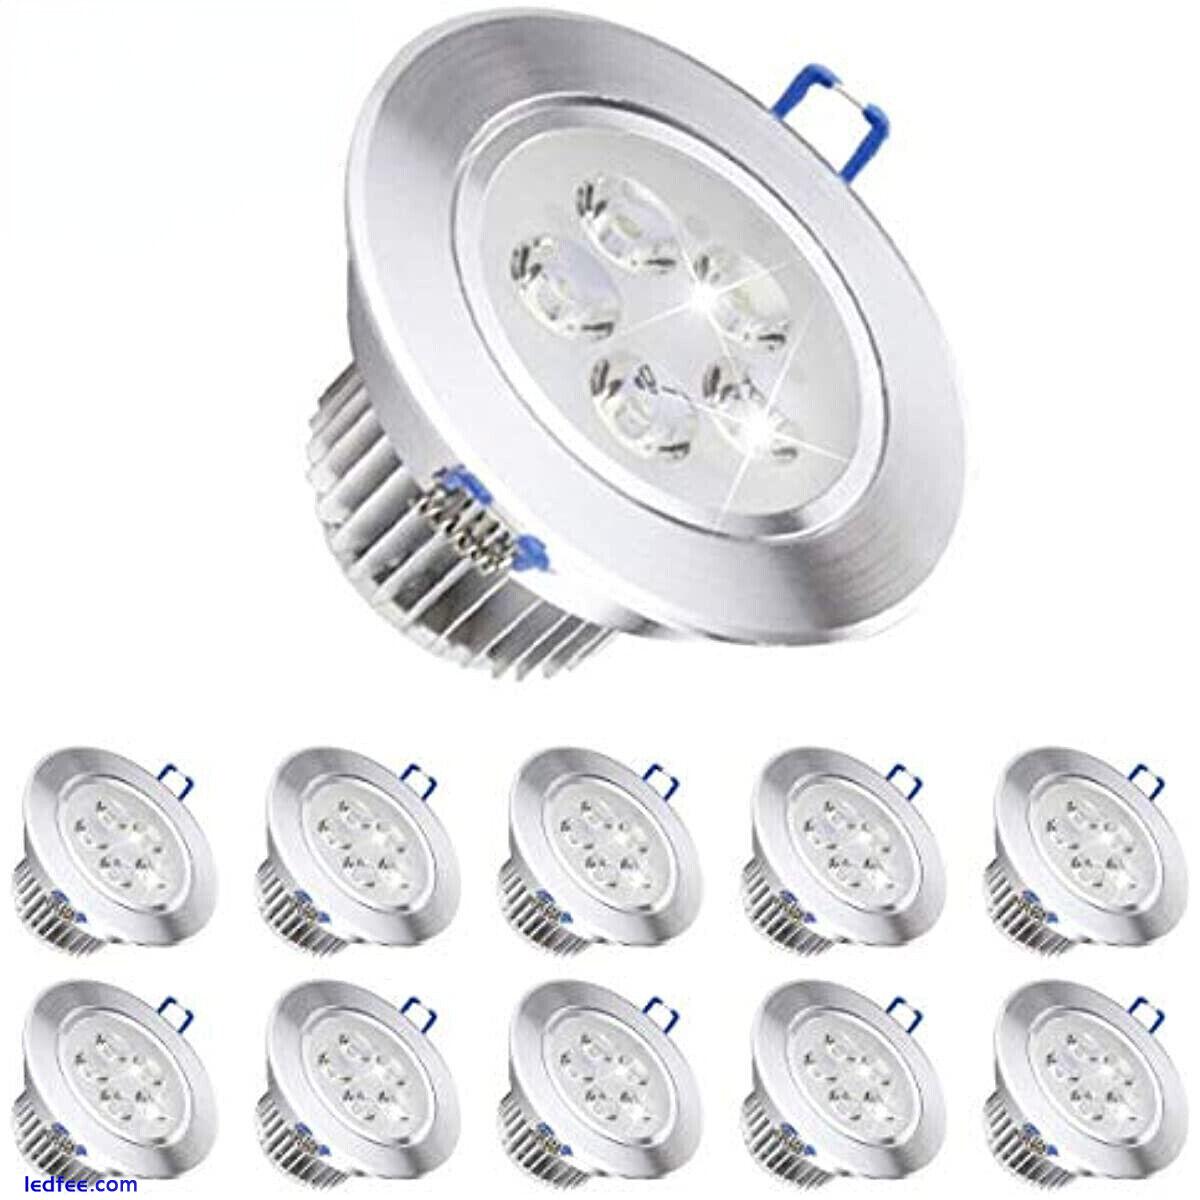 10/20 Pack 5W Dimmable LED Recessed Ceiling Light Spotlights with Led Drivers 0 